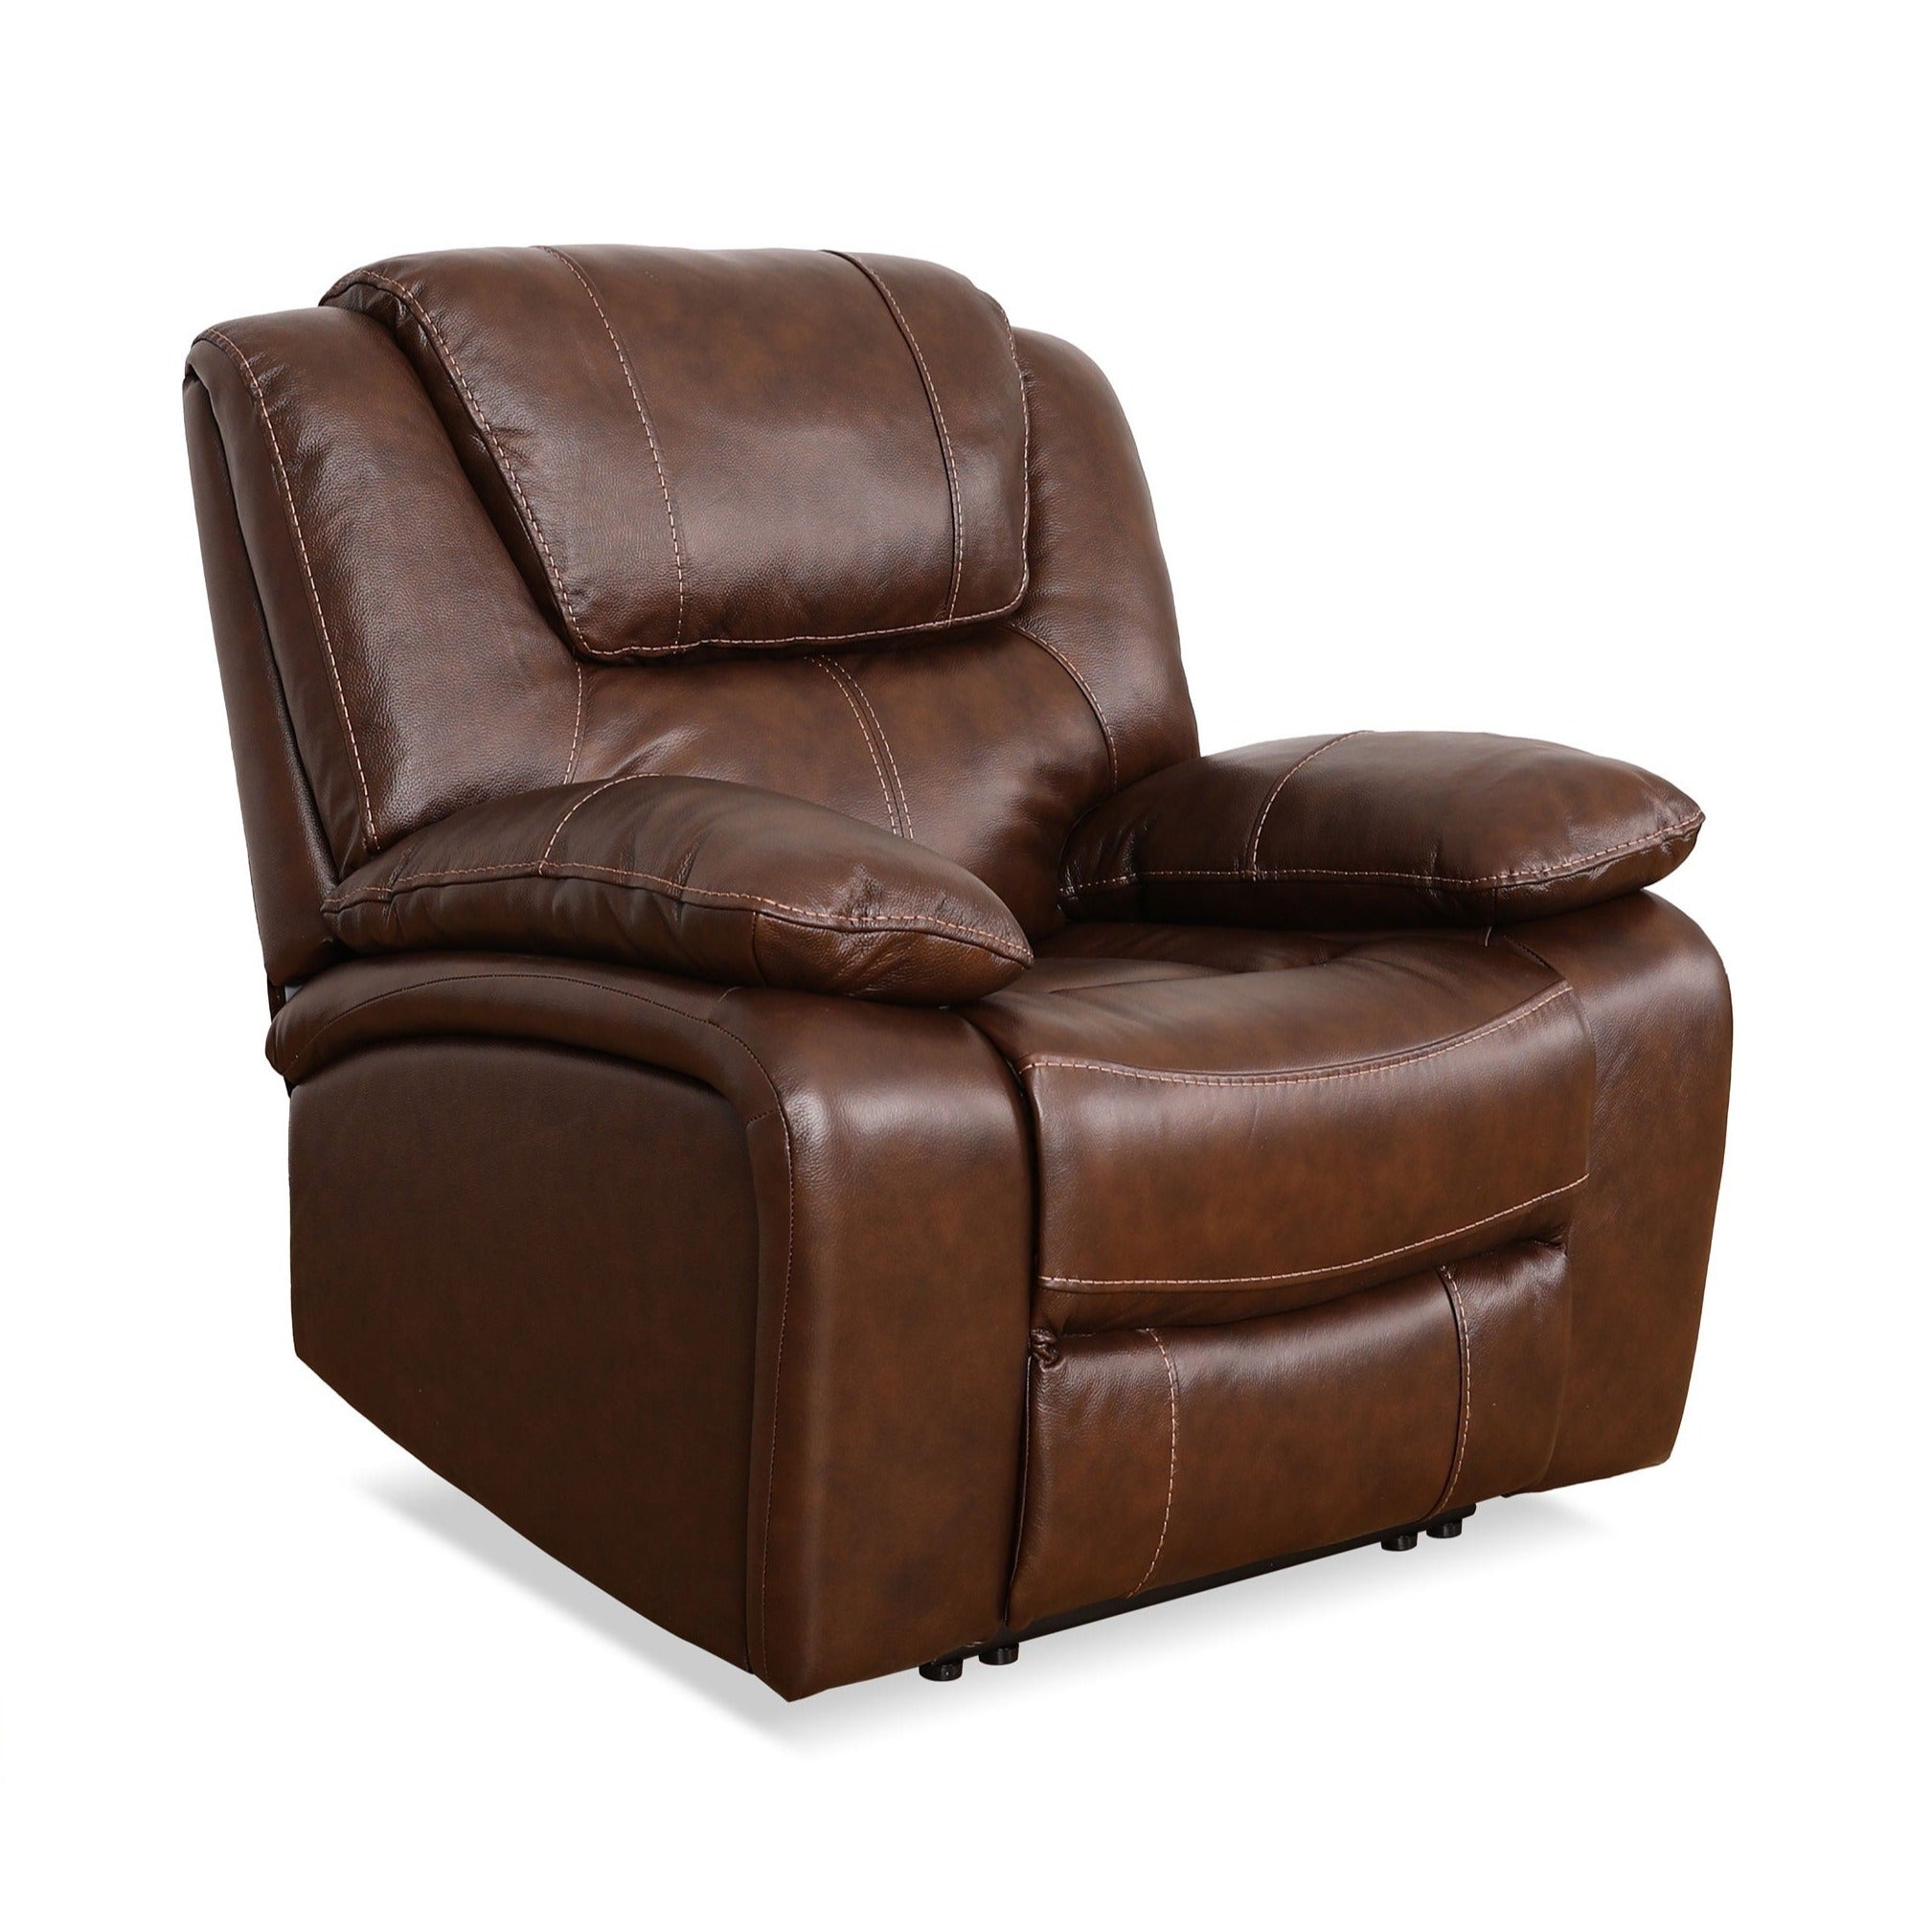 Windsor Leather Reclining Chair